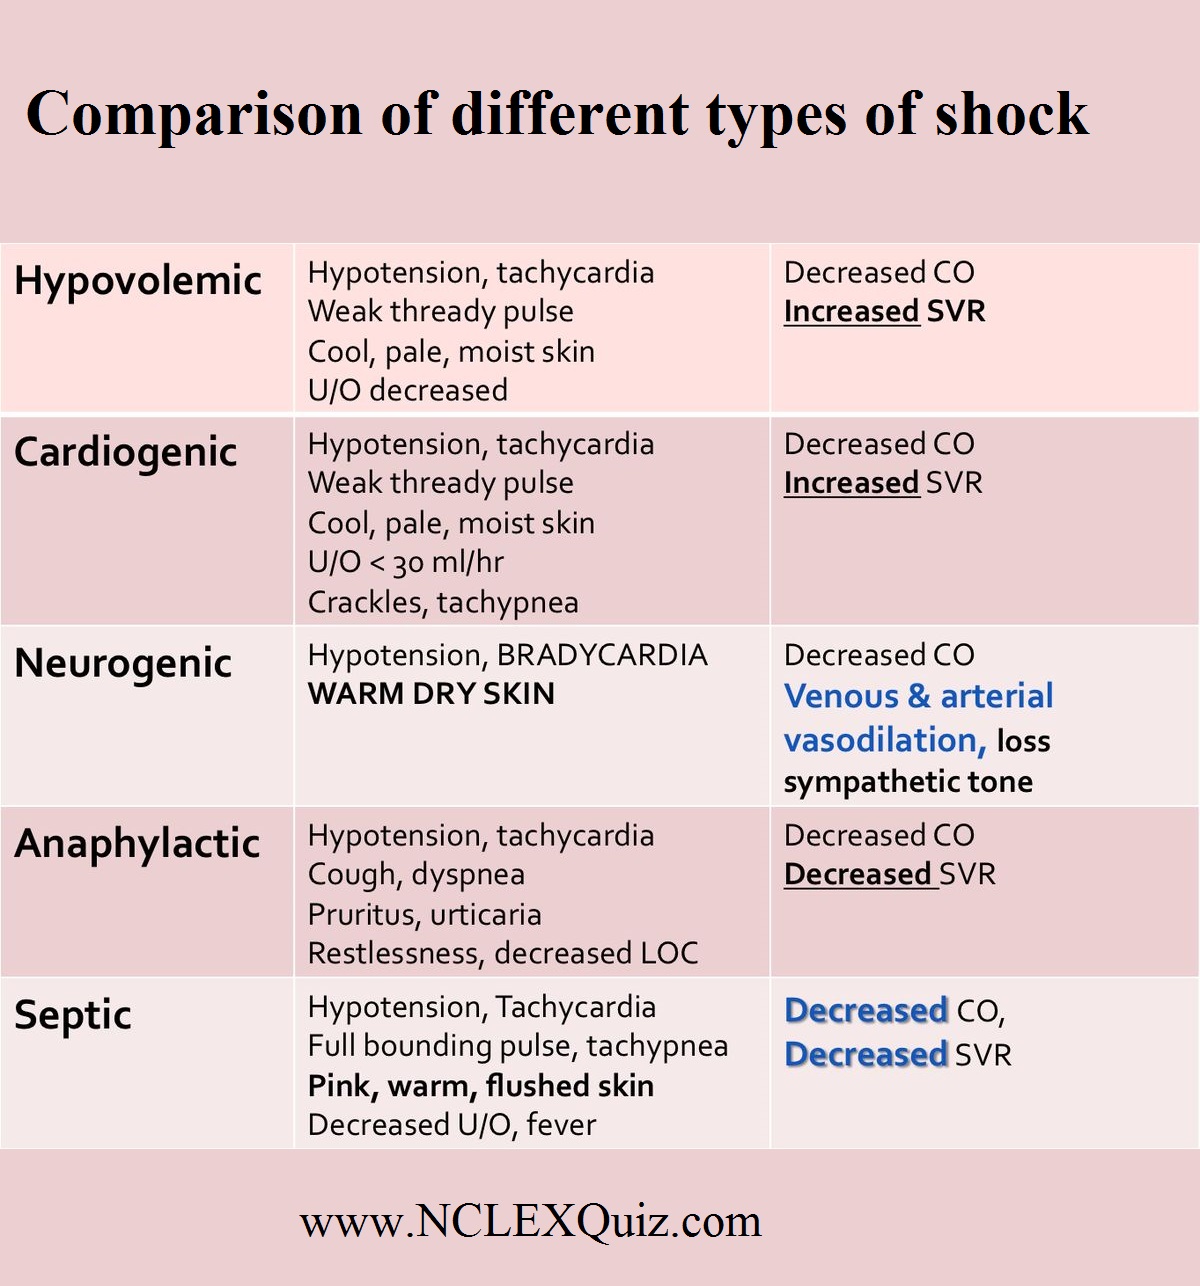 Comparison of Different Types of Shock